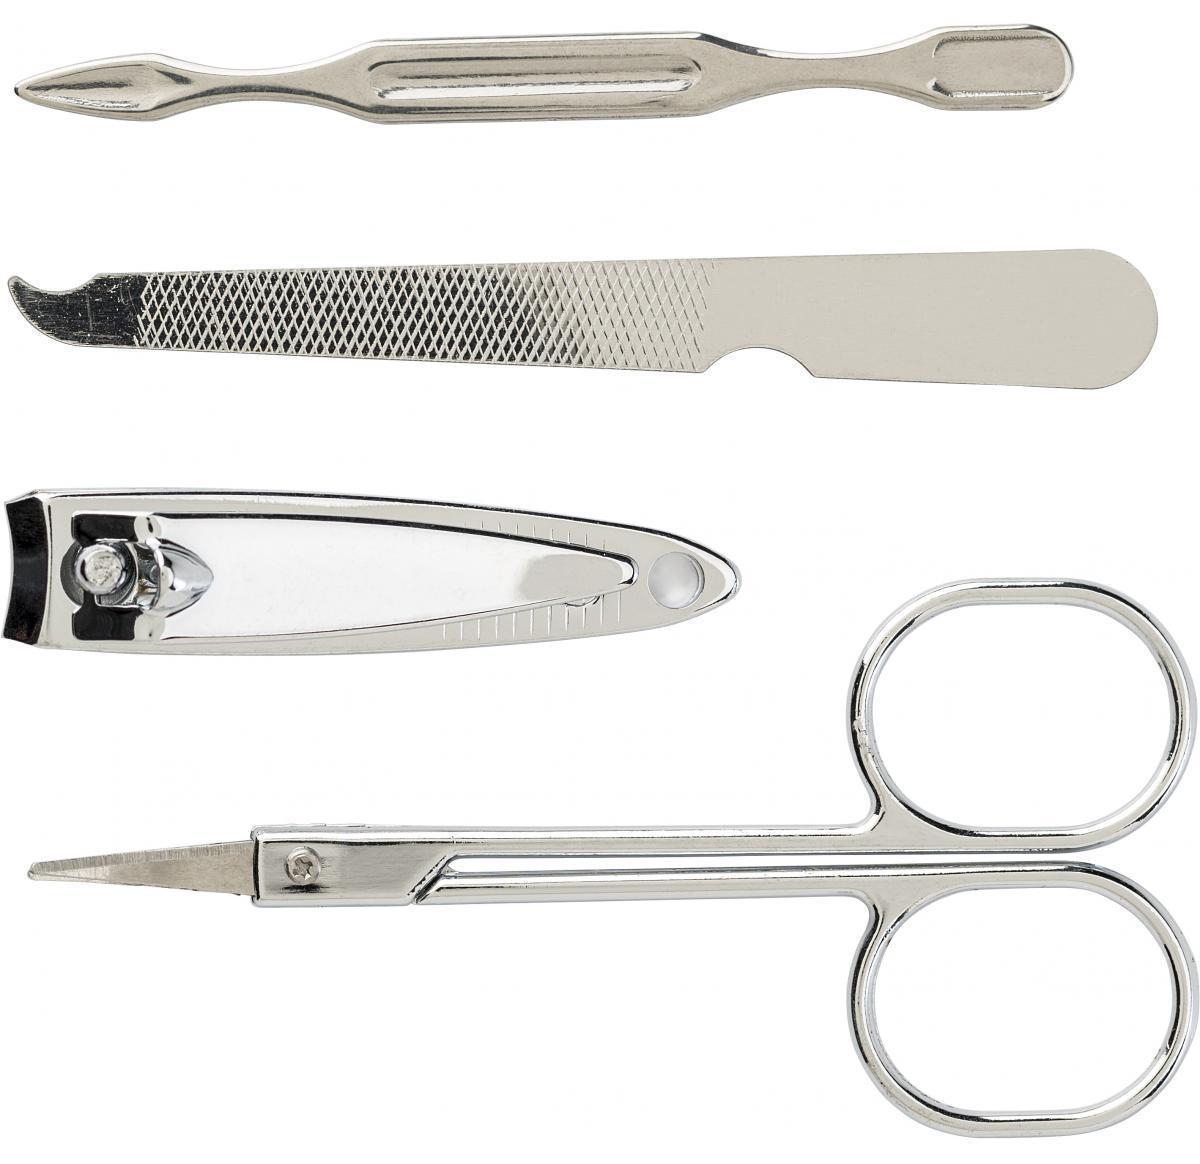 Nail File Set - Contains Scissors, Nail File, Nail Clippers & Cuticle Pusher